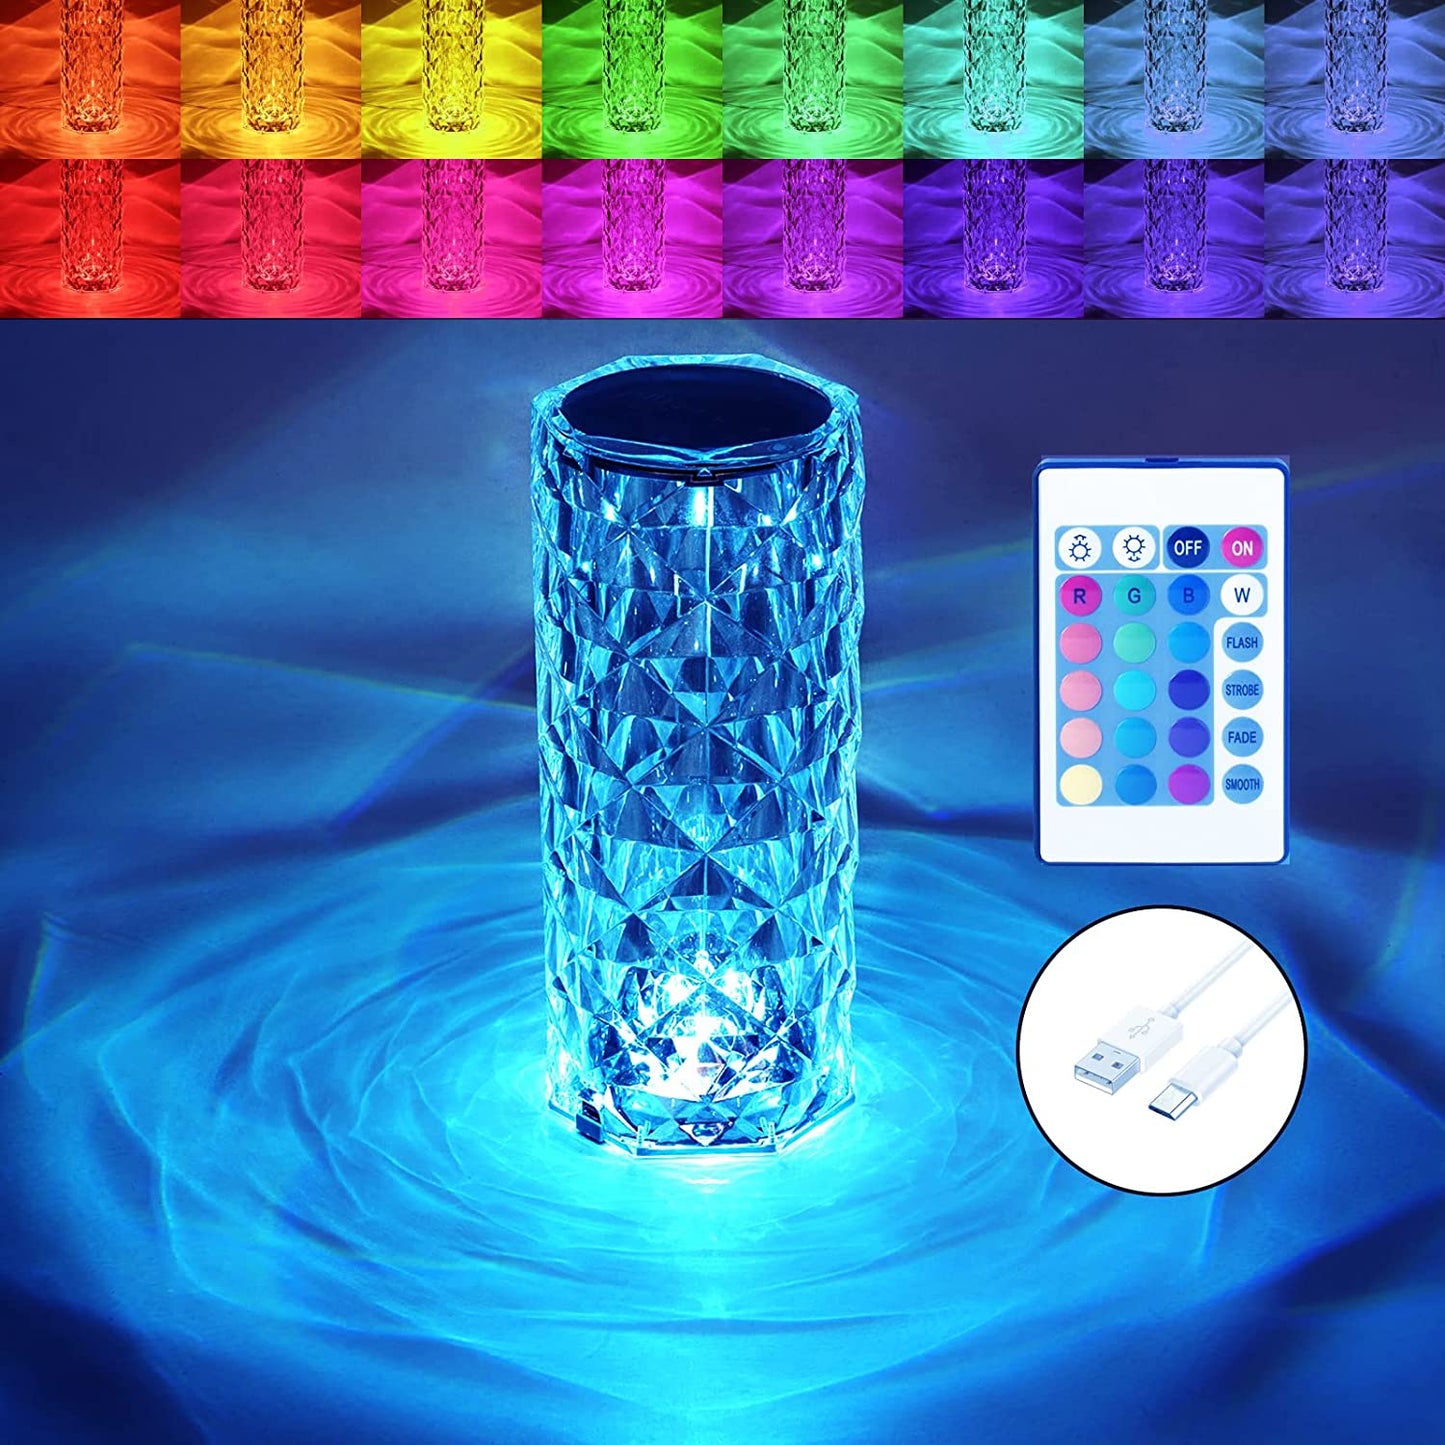 Crystal Rose Diamond 16 Color RGB LED Night Lamp | USB Remote and Touch Control Desk Lamp for Bedroom, Living Room